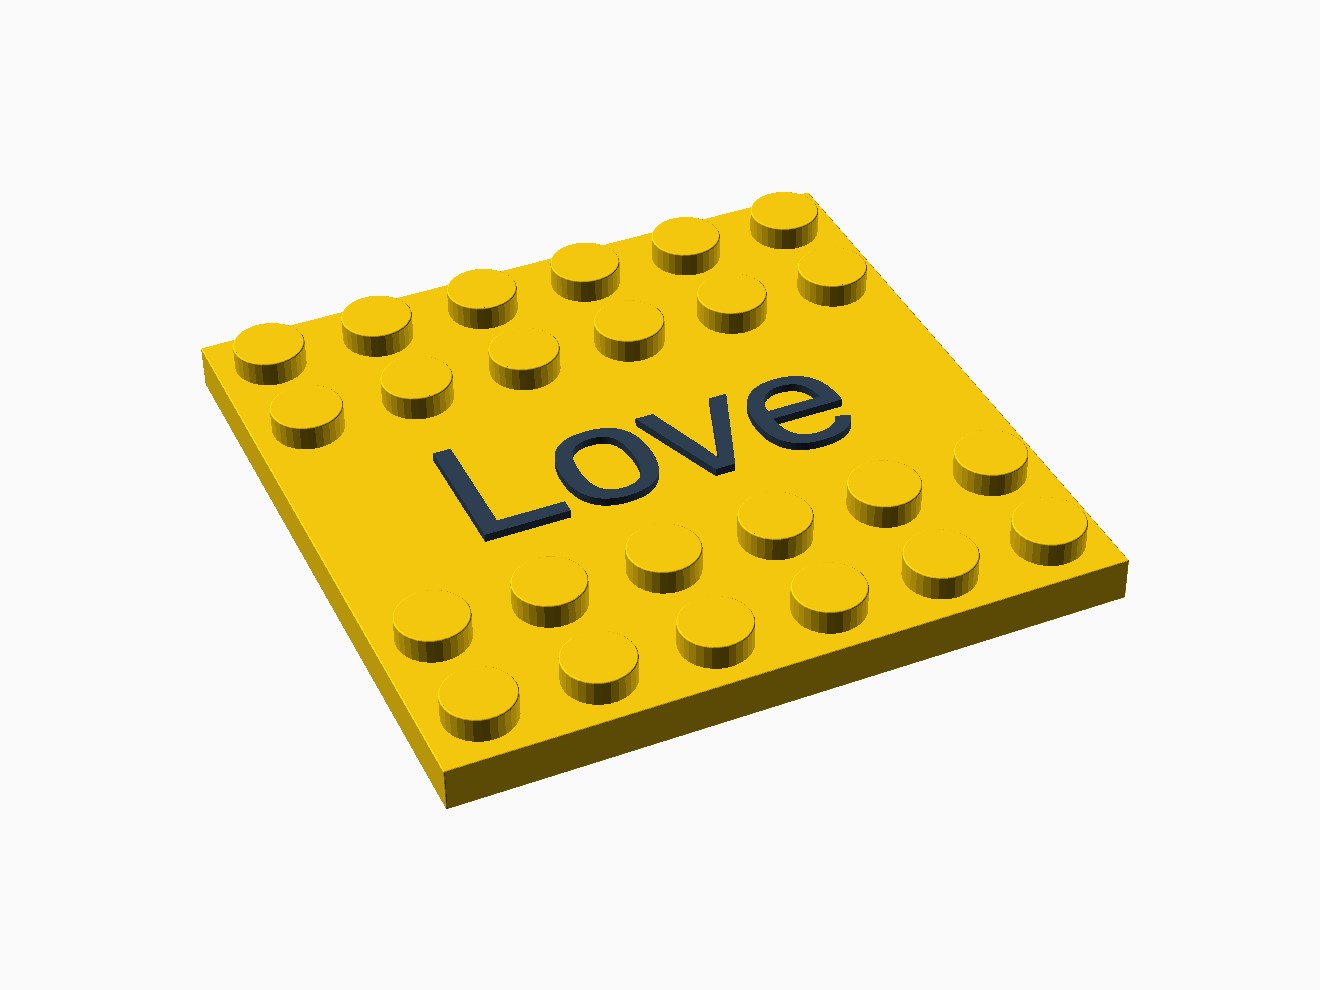 3D printable model of a LEGO 6x6 plate with text between knobs.